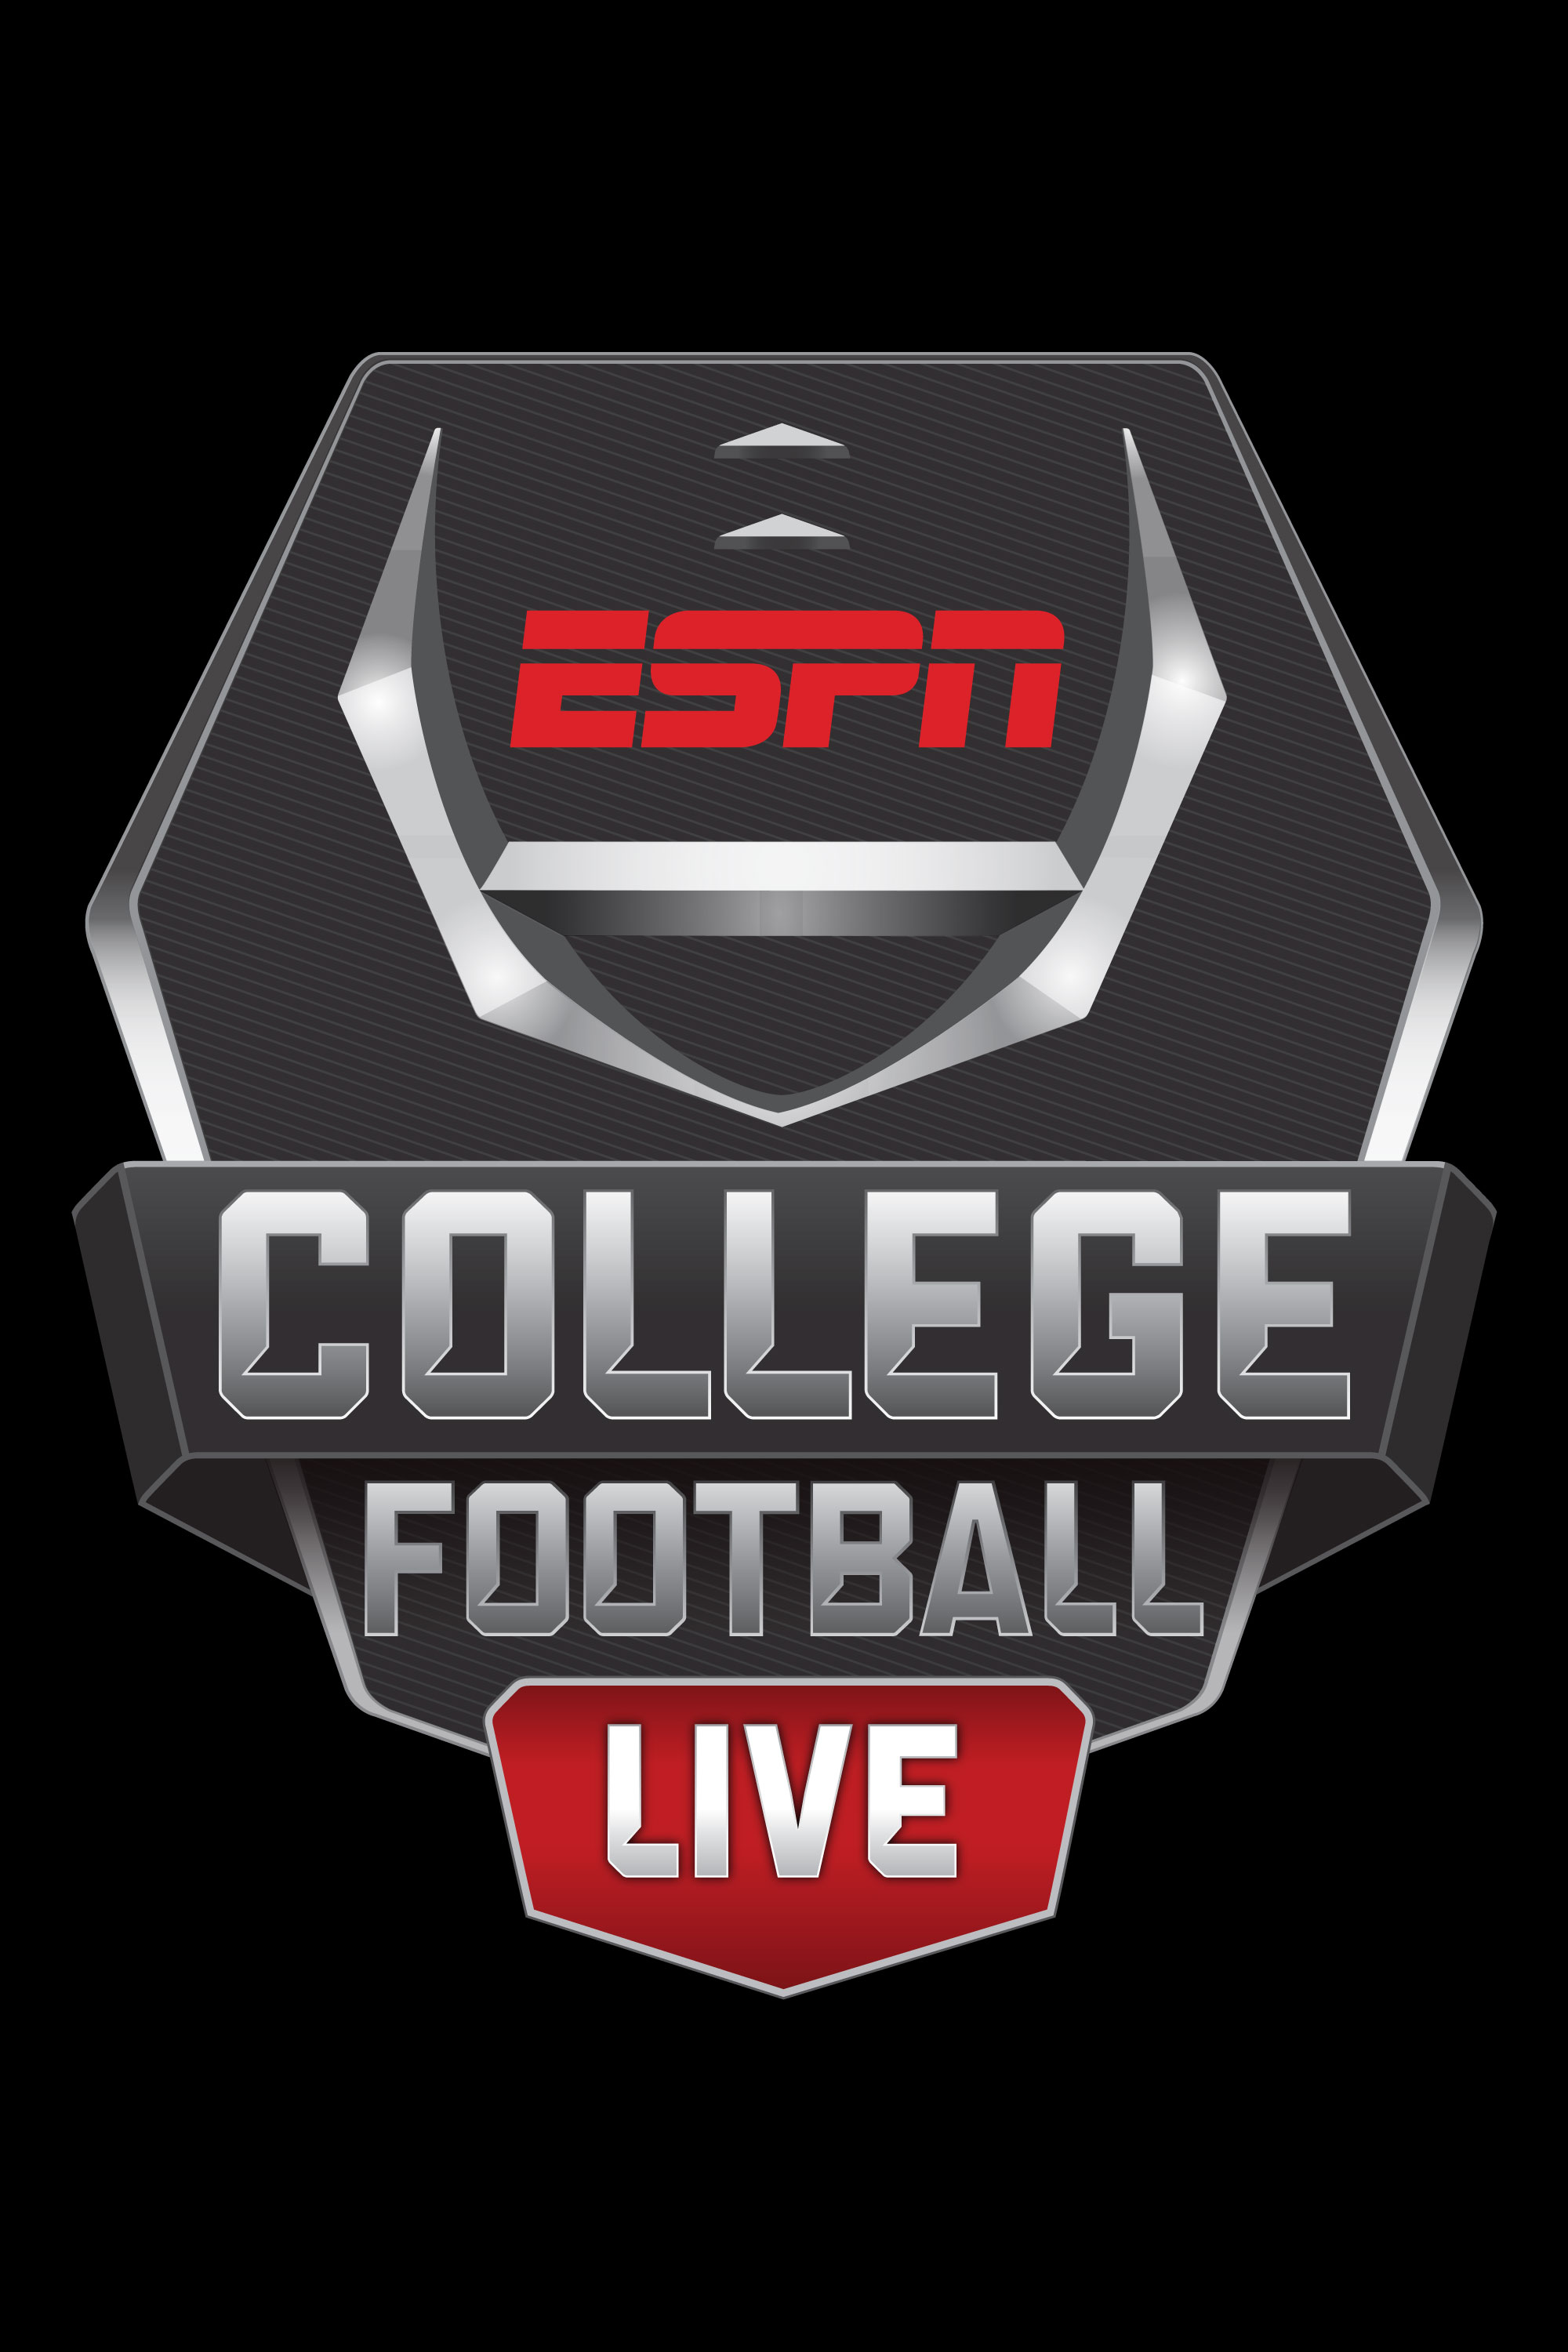 College Football Live - Where to Watch and Stream